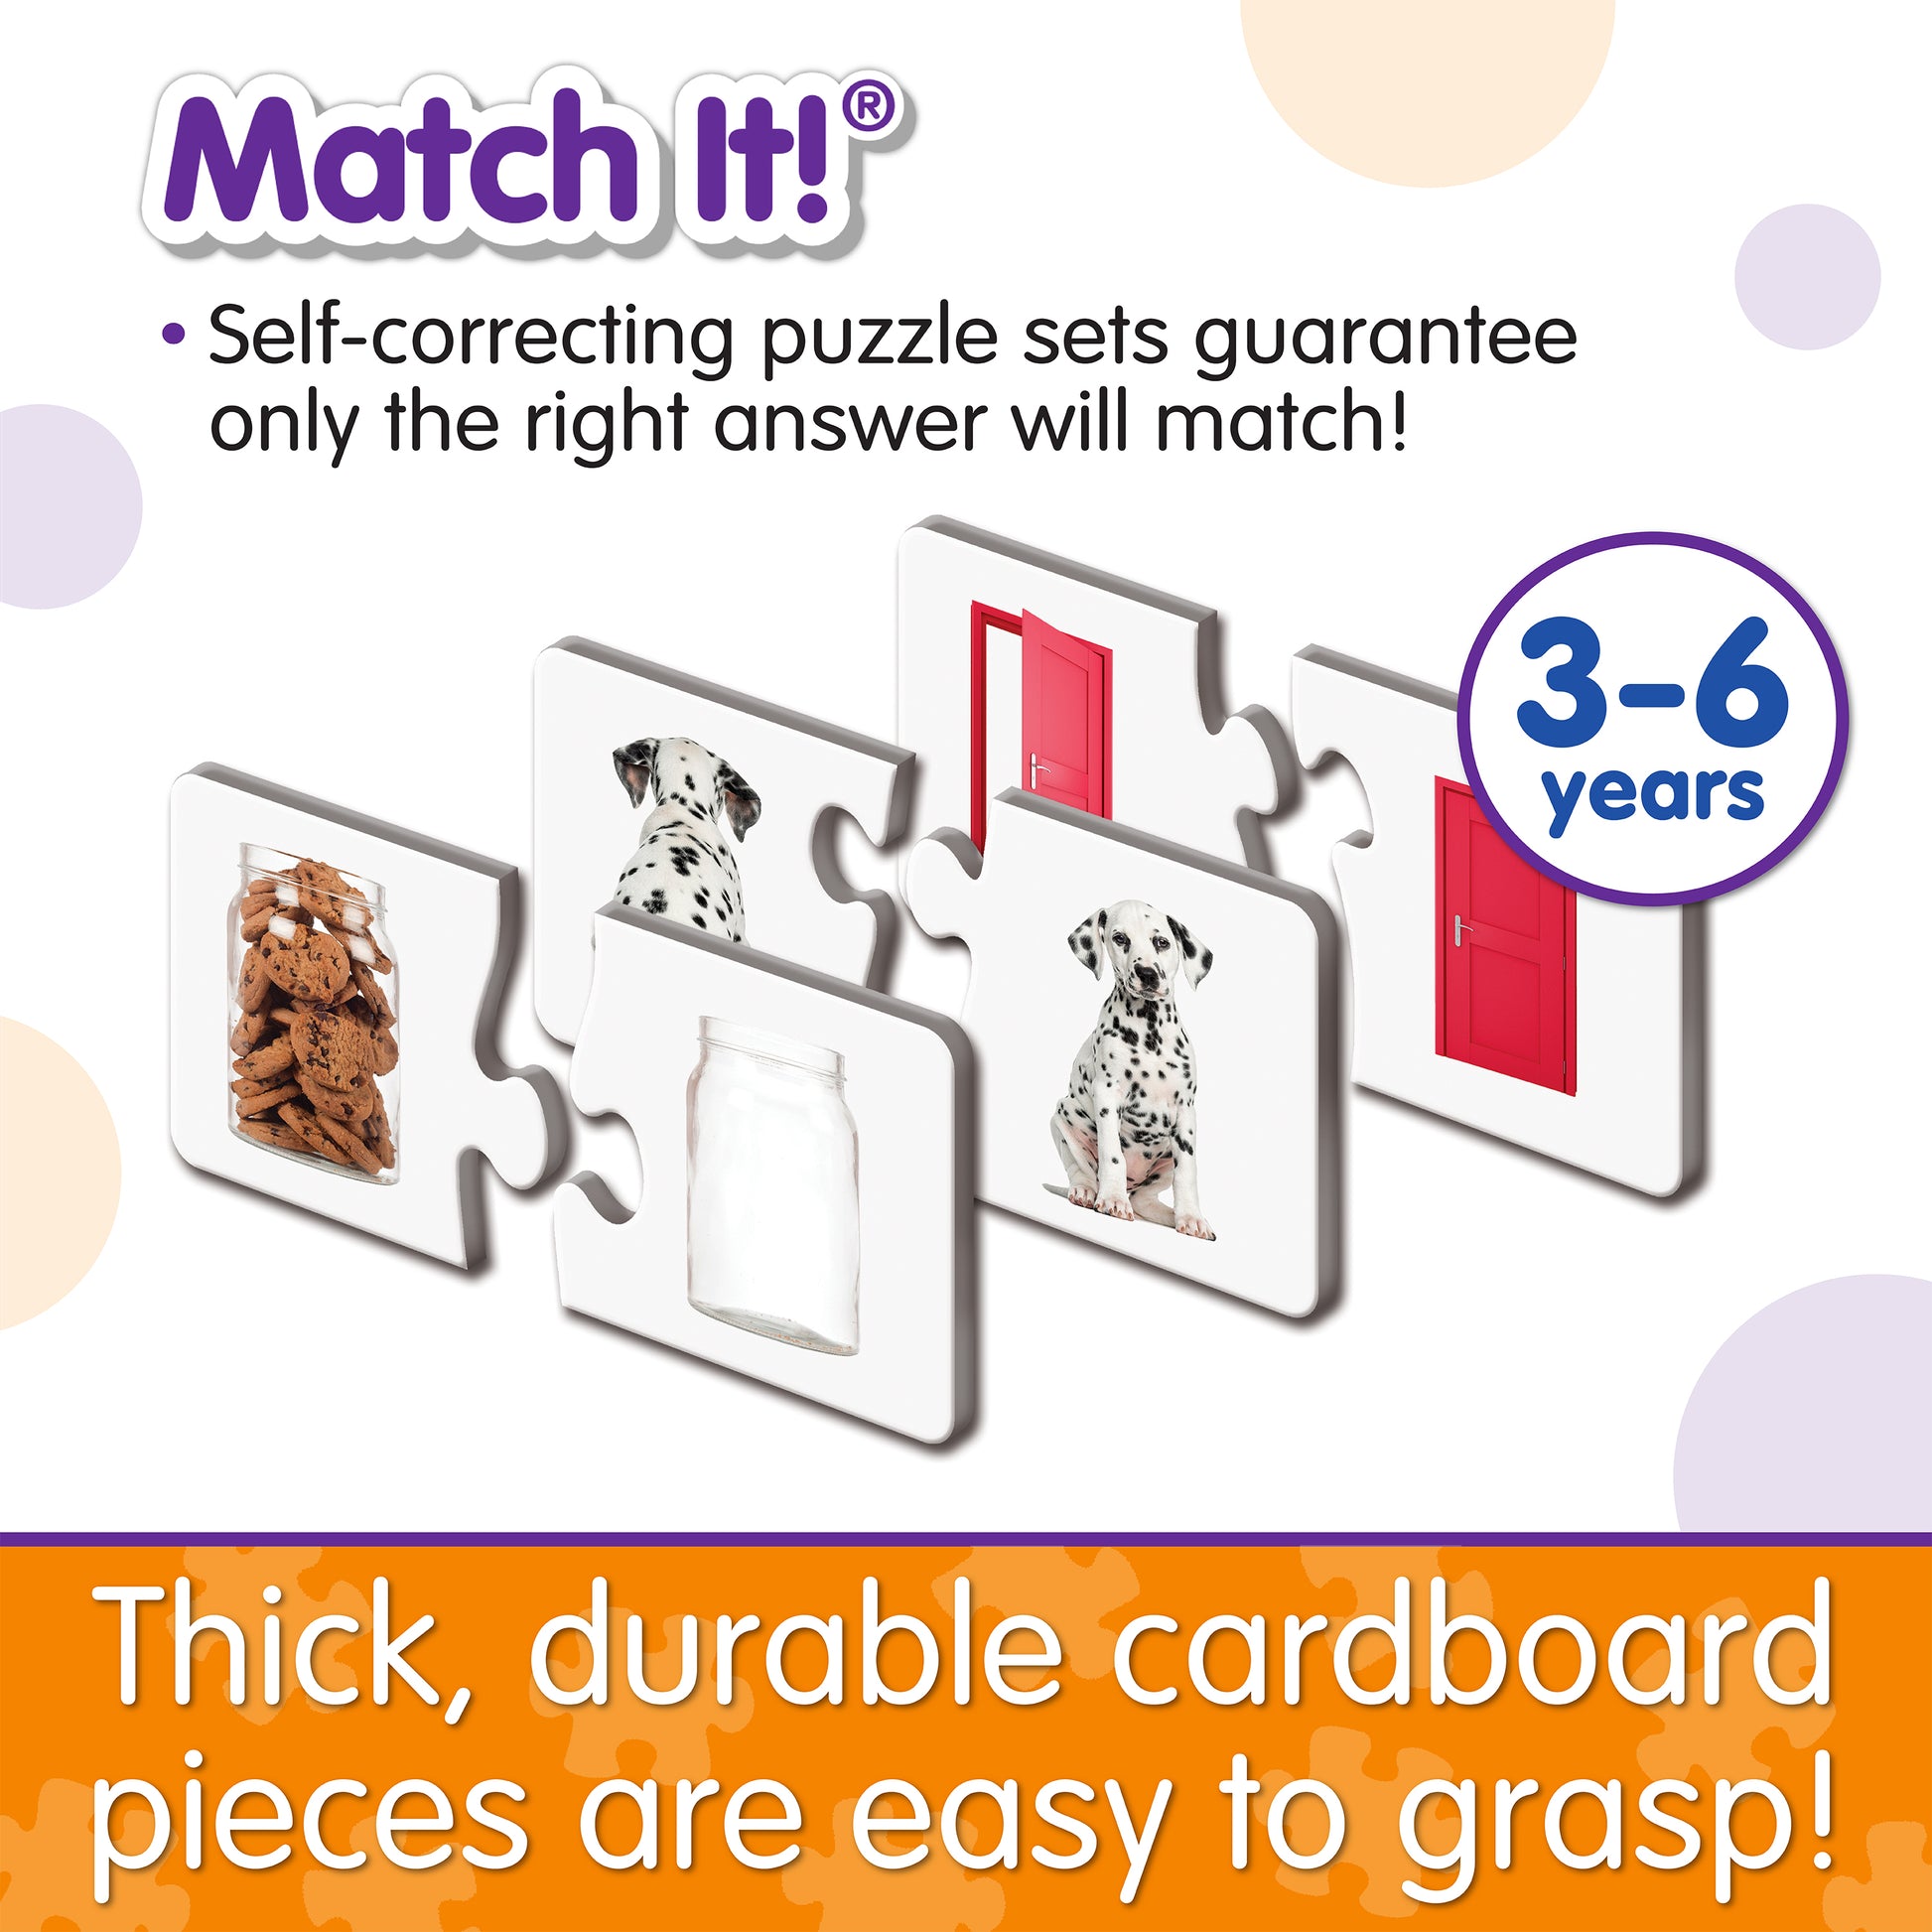 Infographic about Match It - Opposites' features that says, "Thick, durable cardboard pieces are easy to grasp!"